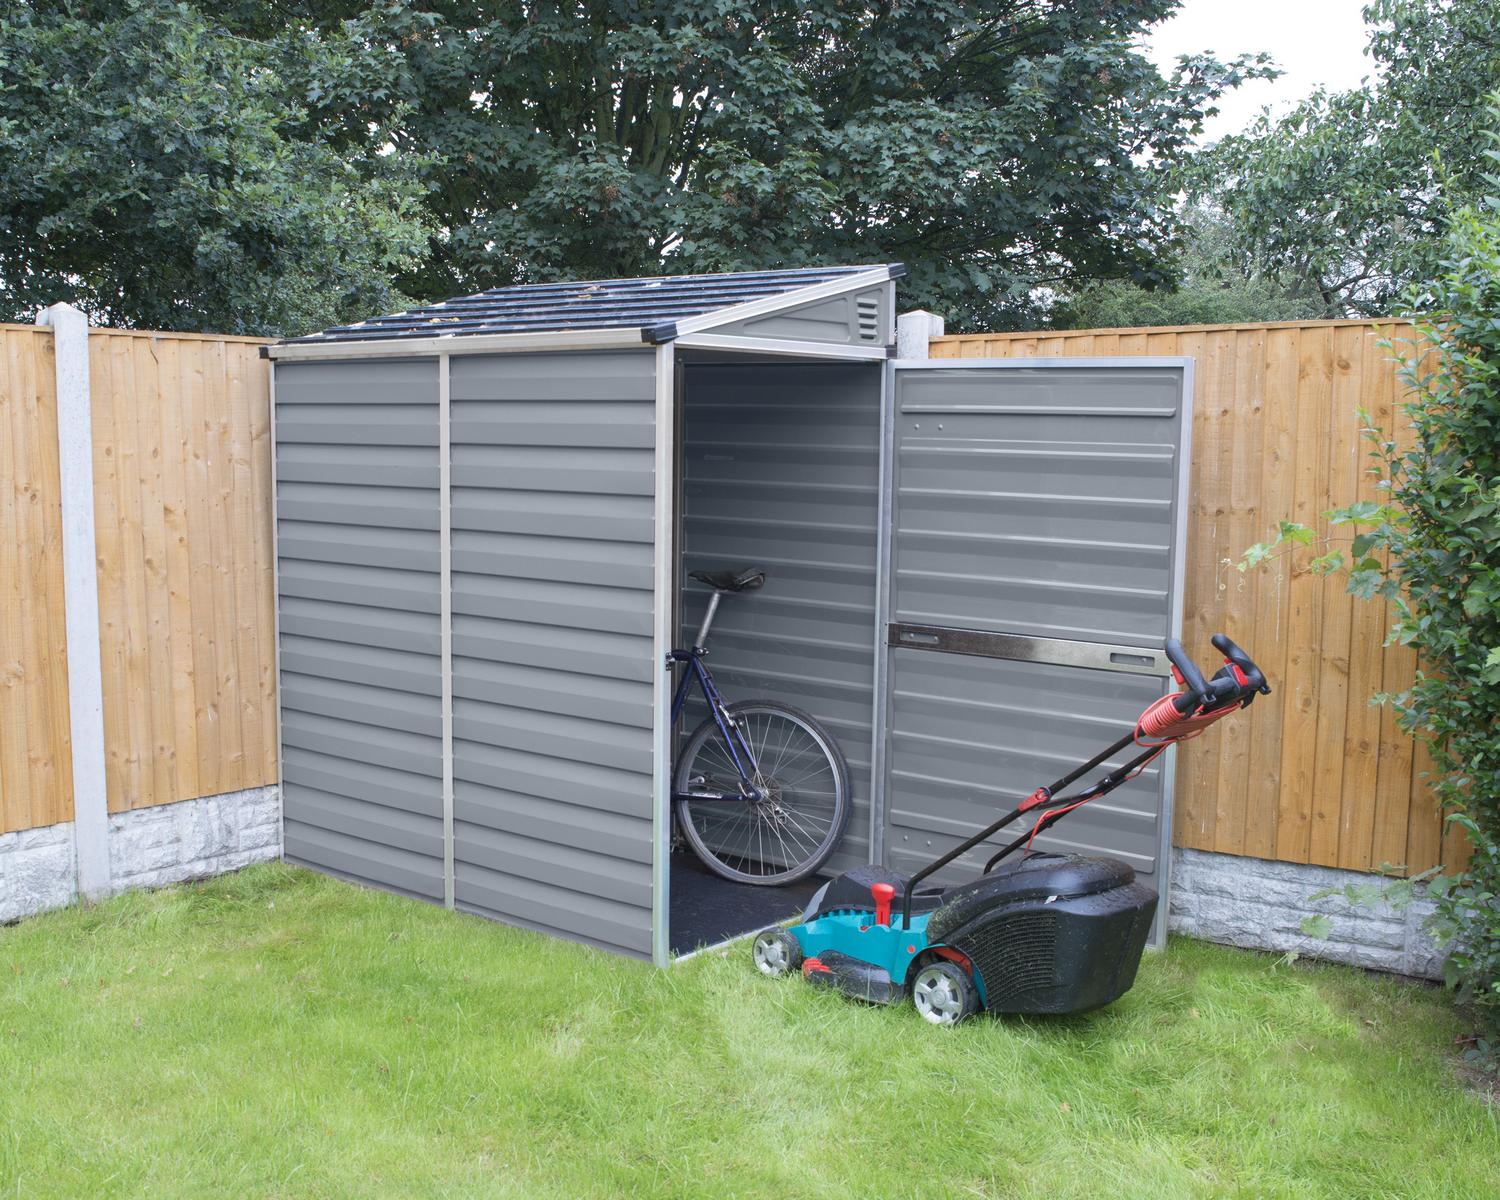 Plastic Garden Shed Pent 4 ft. x 6 ft. An open-door shed with gray polycarbonate panels and an aluminum frame is used to store a Lawn Mower and bike